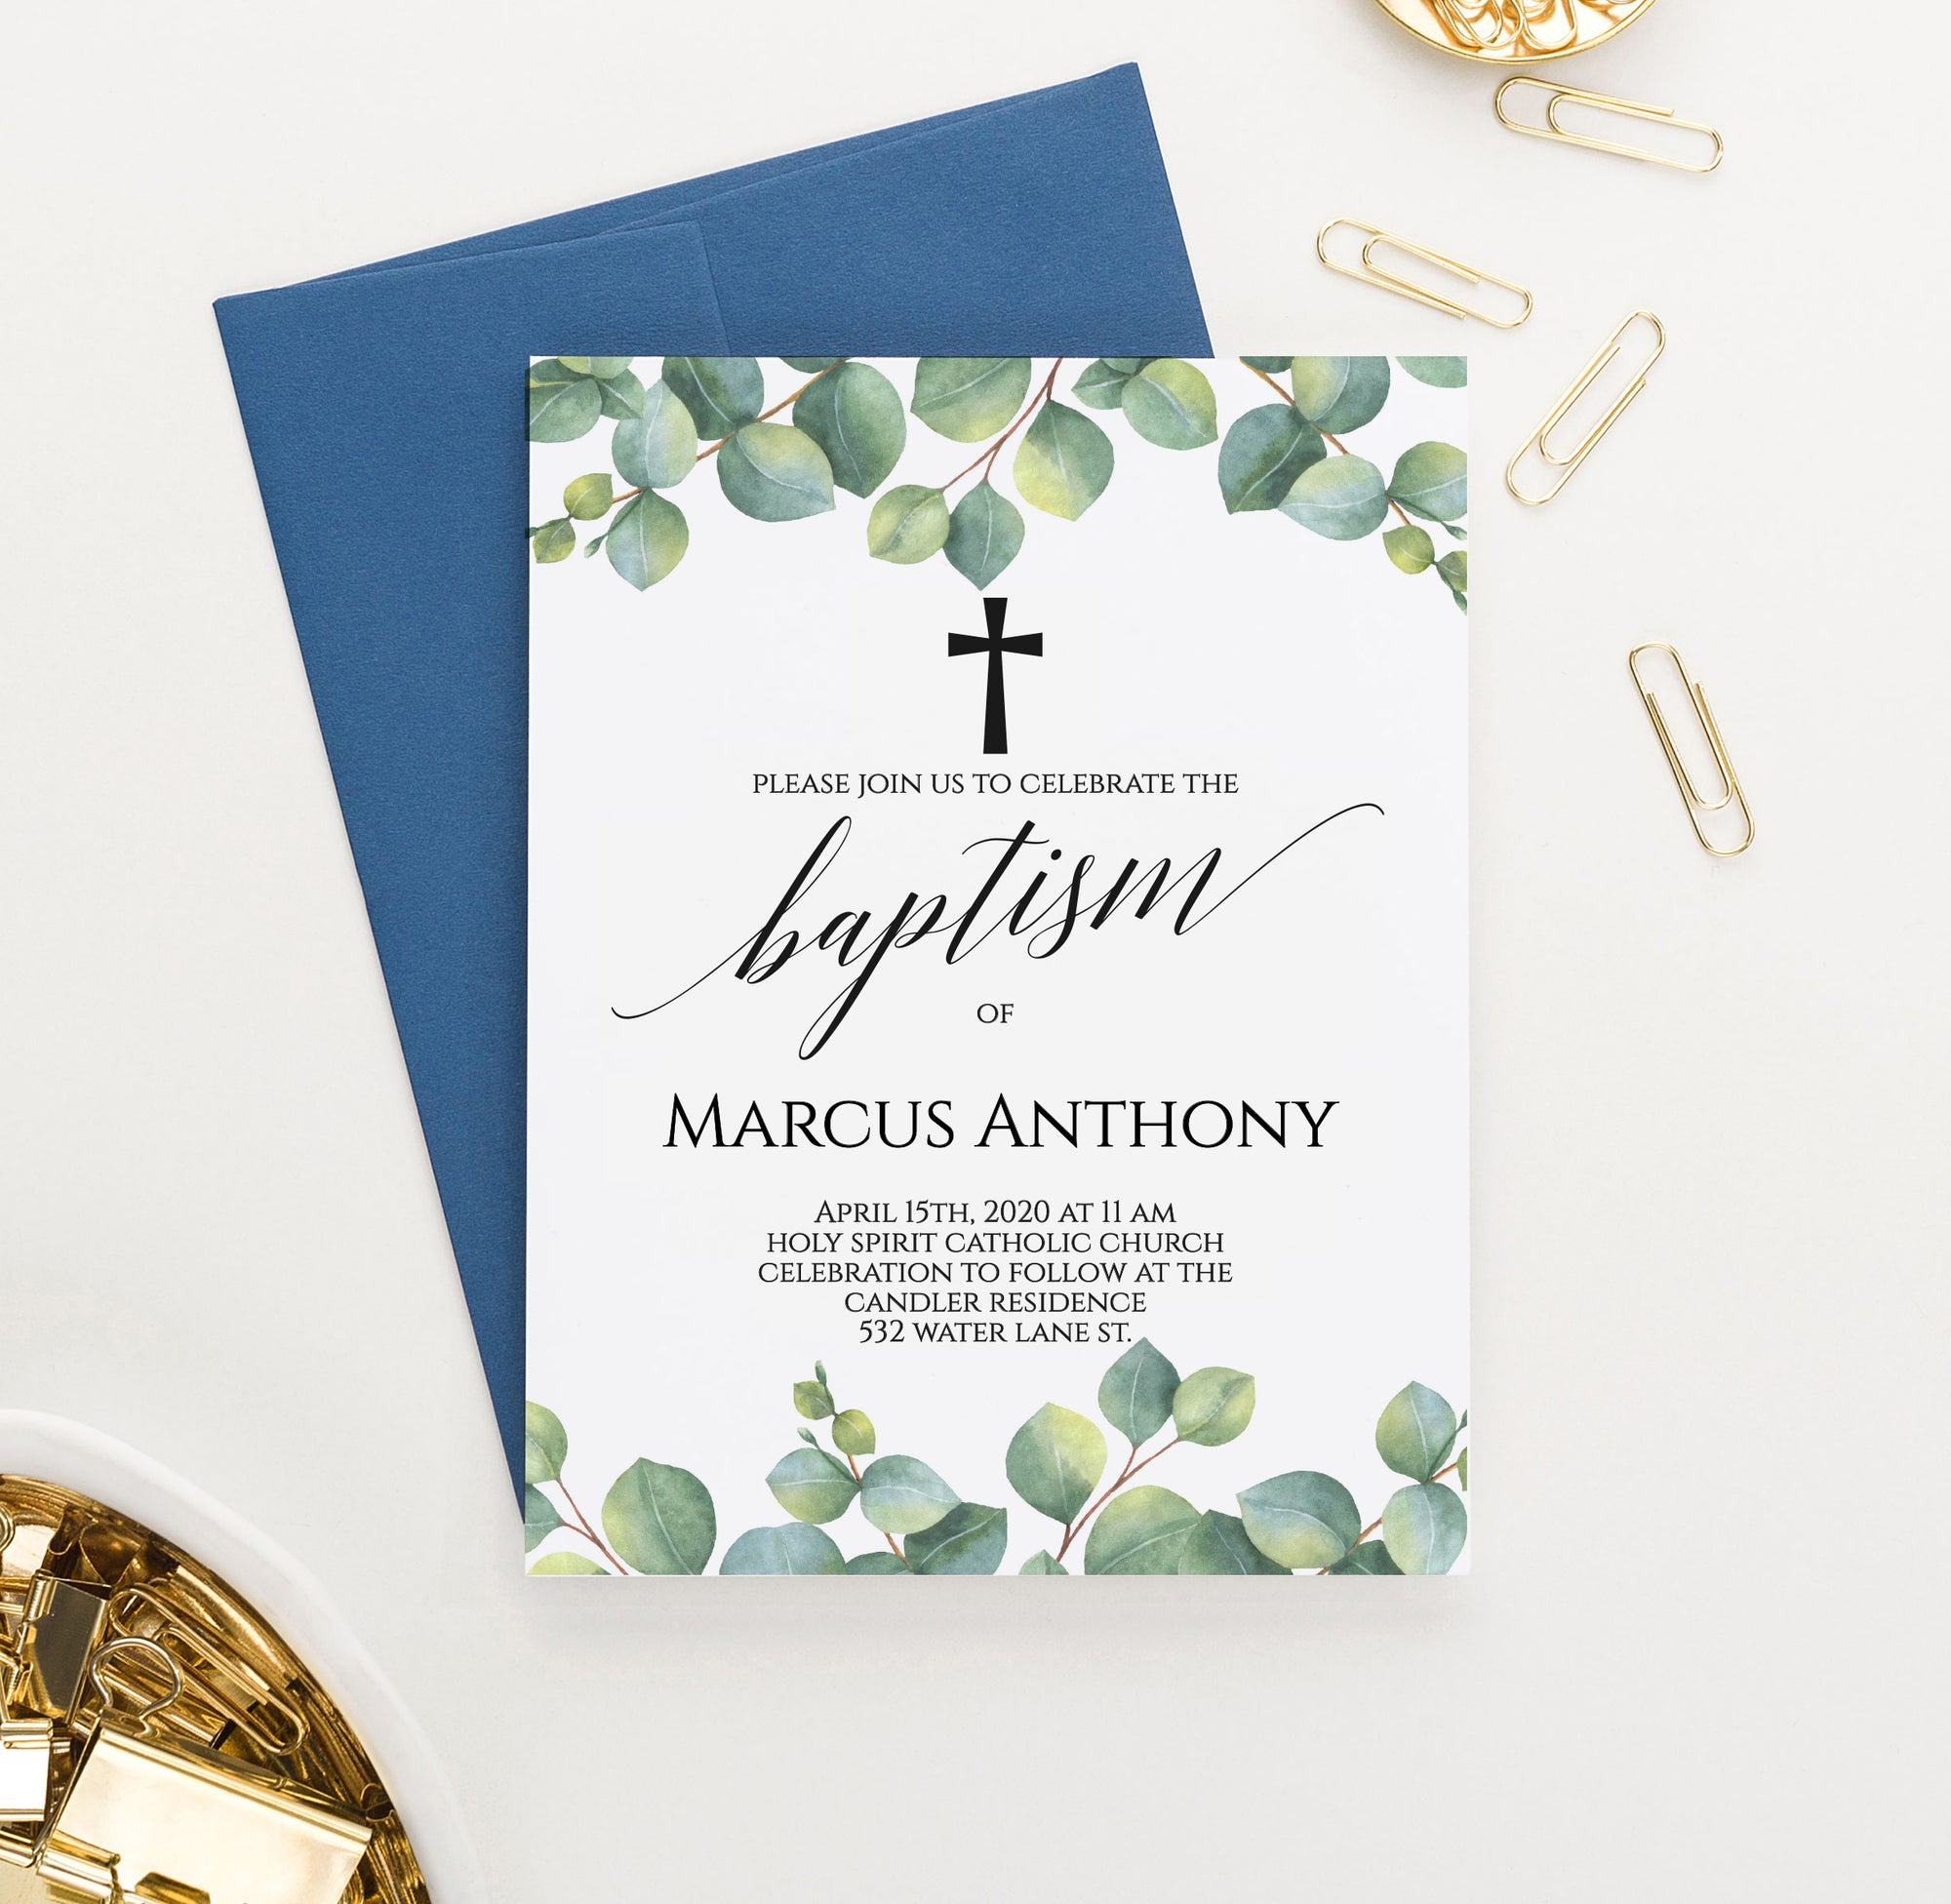 Personalized Baptism Invitations With Greenery